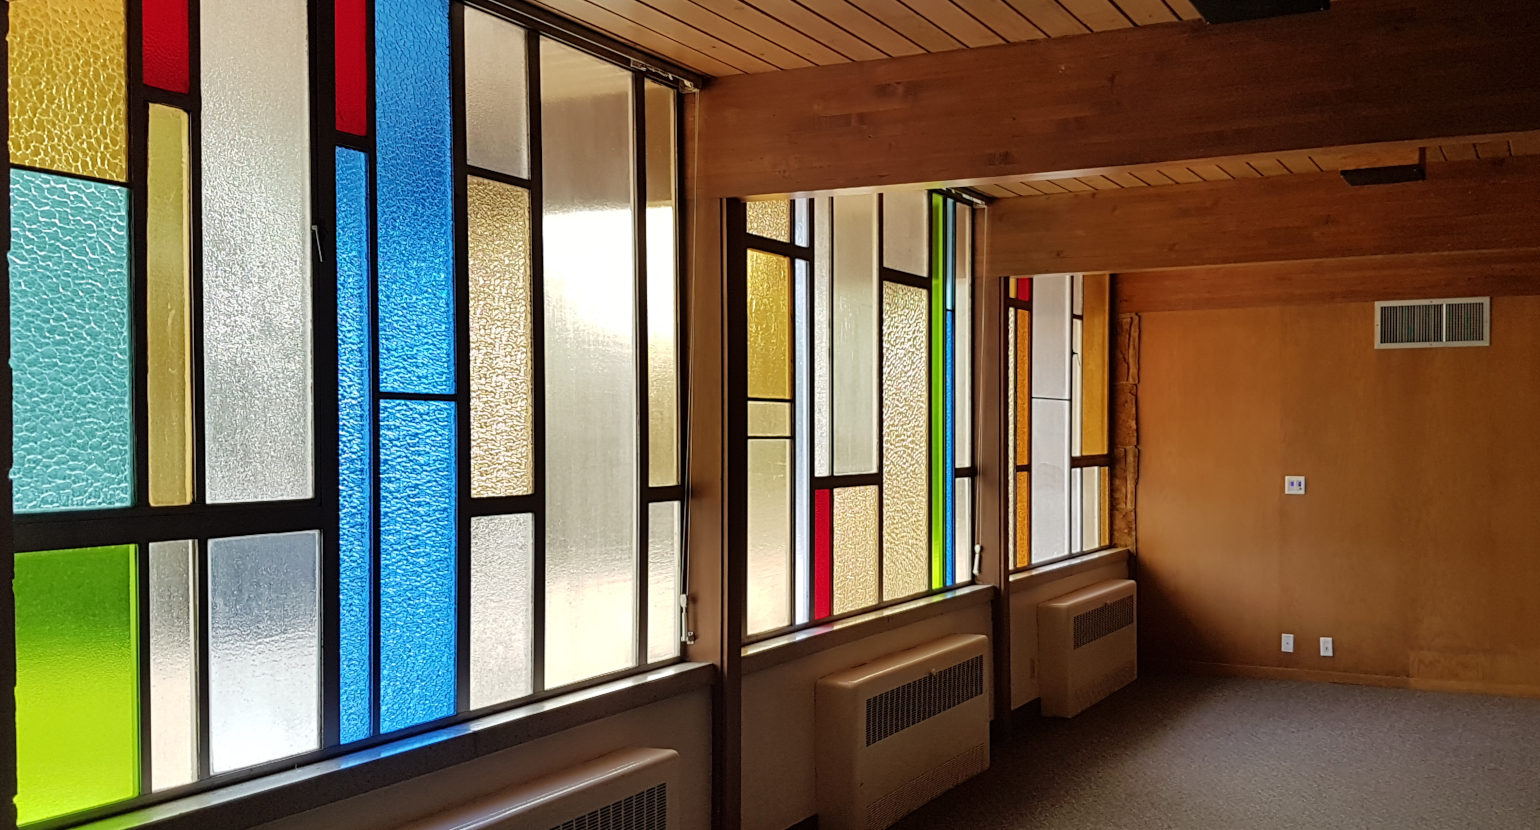 Photo of a room with colorful translucent glass windows; wooden beams, walls, and ceiling; and heating vents